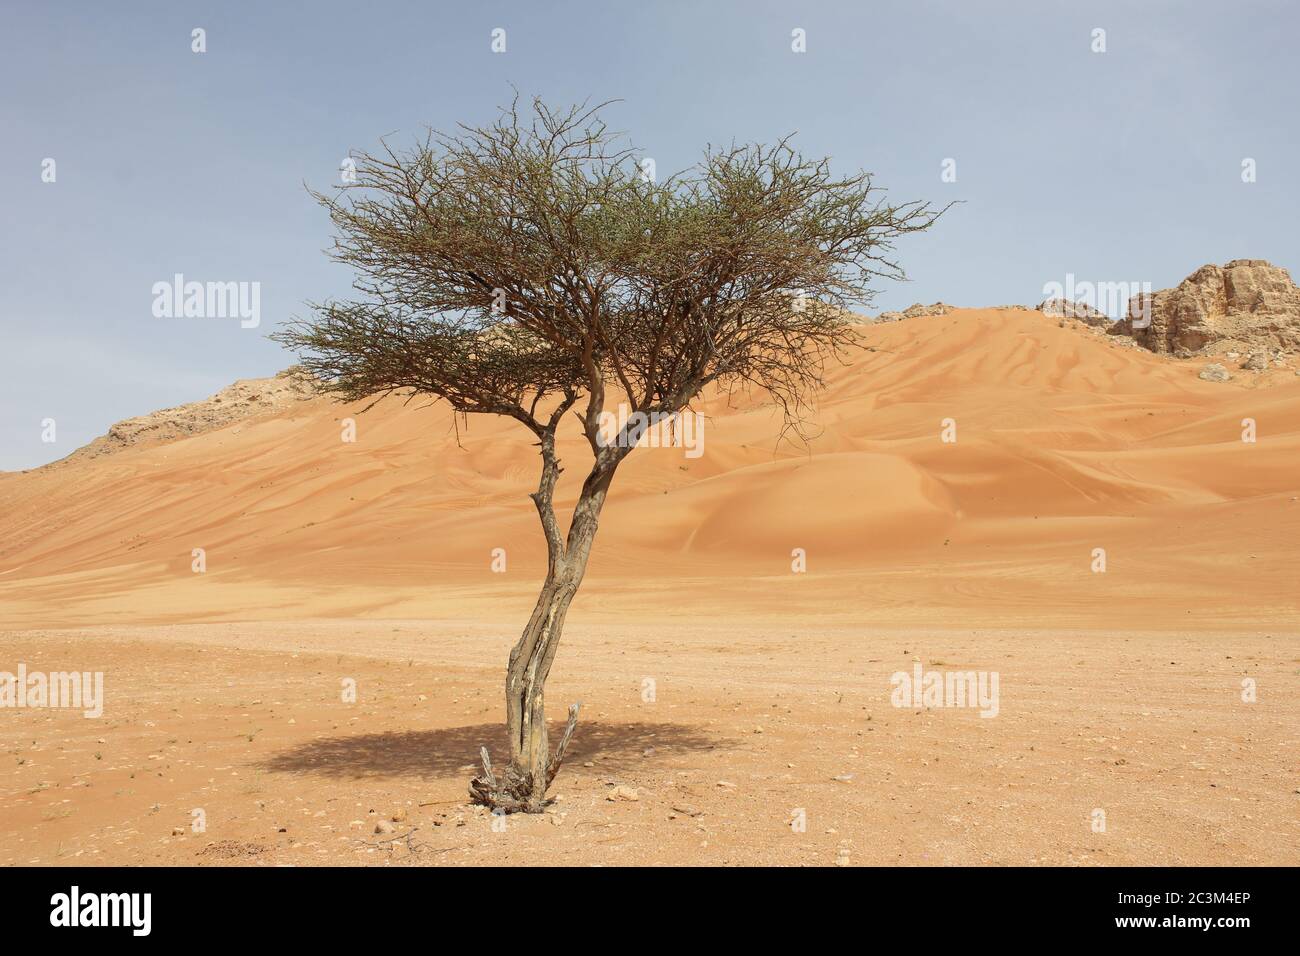 Umbrella Thorn Acacia (Acacia tortilis) tree grows in arid Arabian desert sand dunes. The native plant is browsed by camels, goats and wildlife. Stock Photo